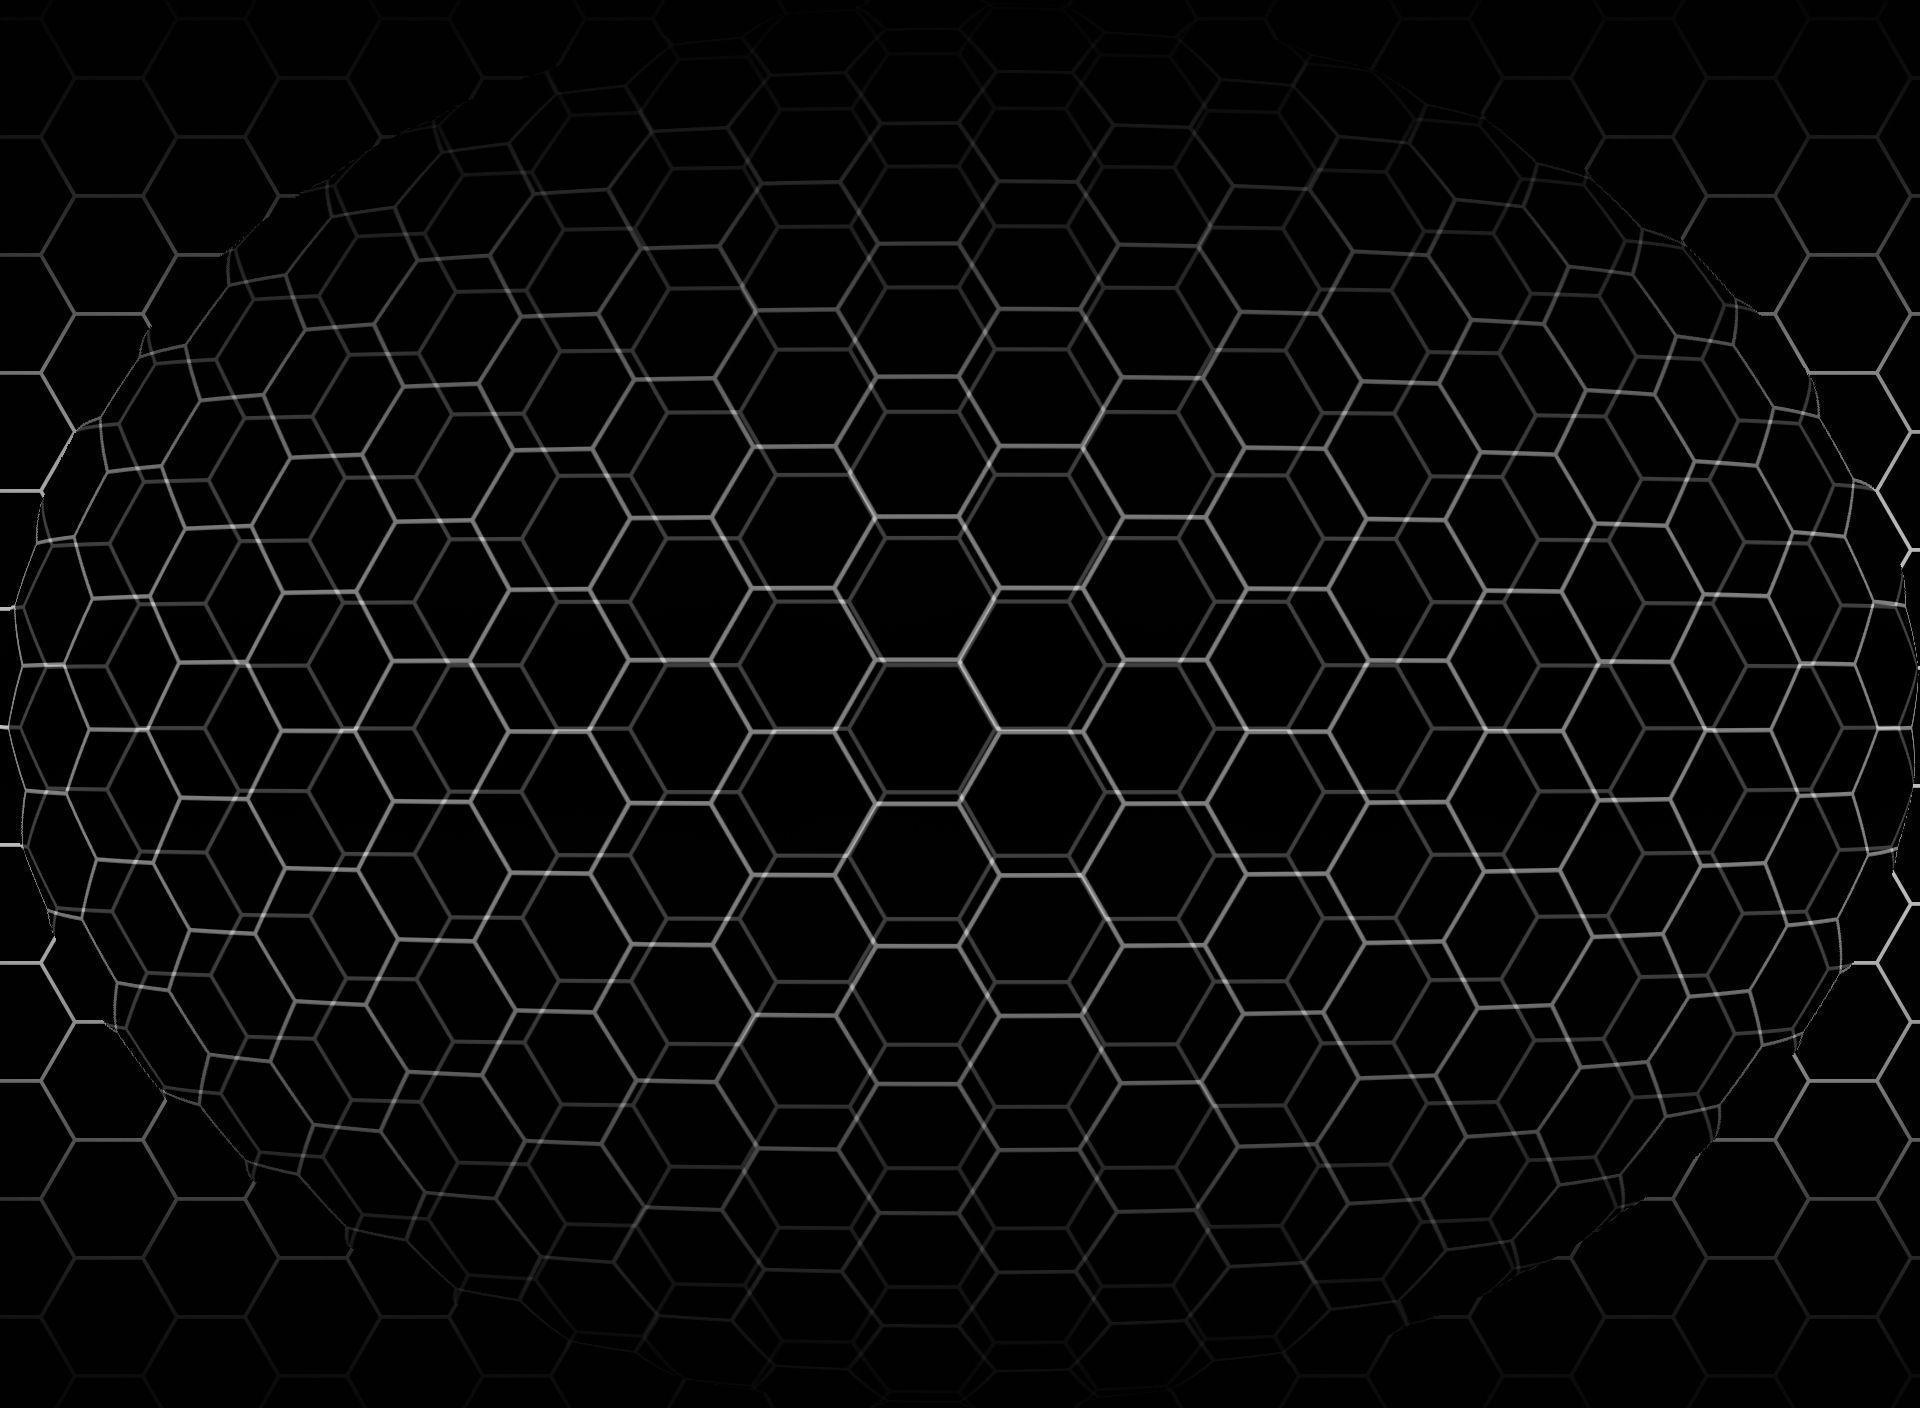 Blue Honeycomb Wallpapers